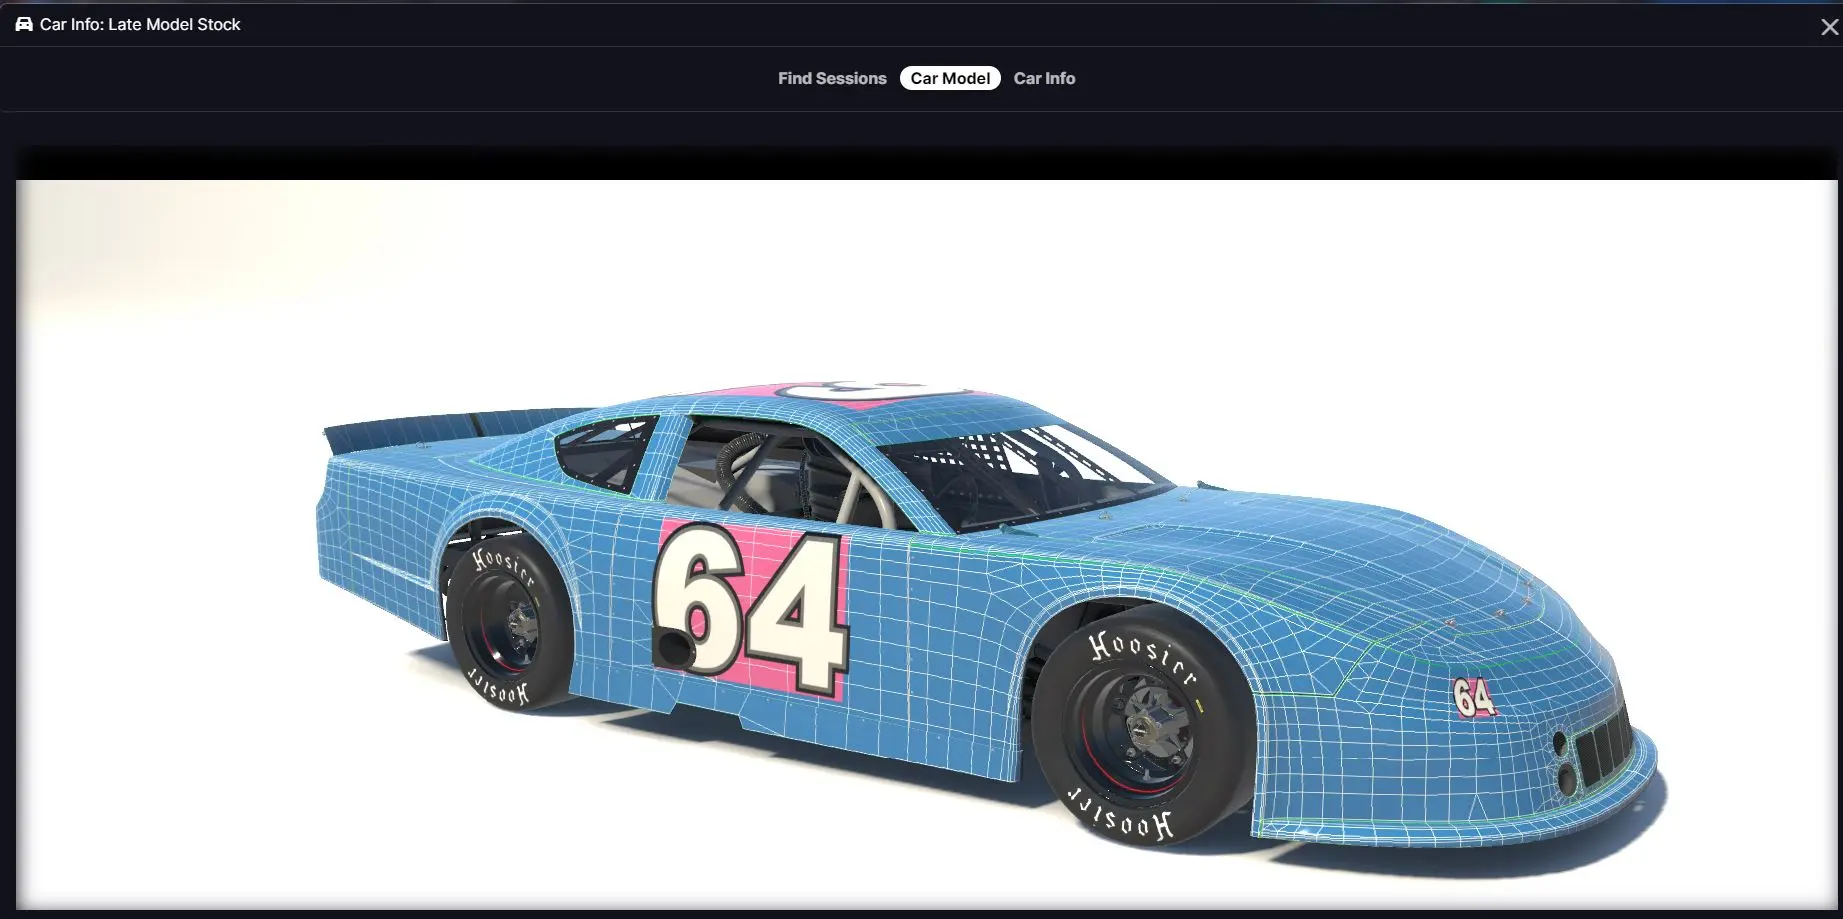 Our base livery as exported from GIMP into the correct iRacing/paint folder  with our customer ID. It's a match!